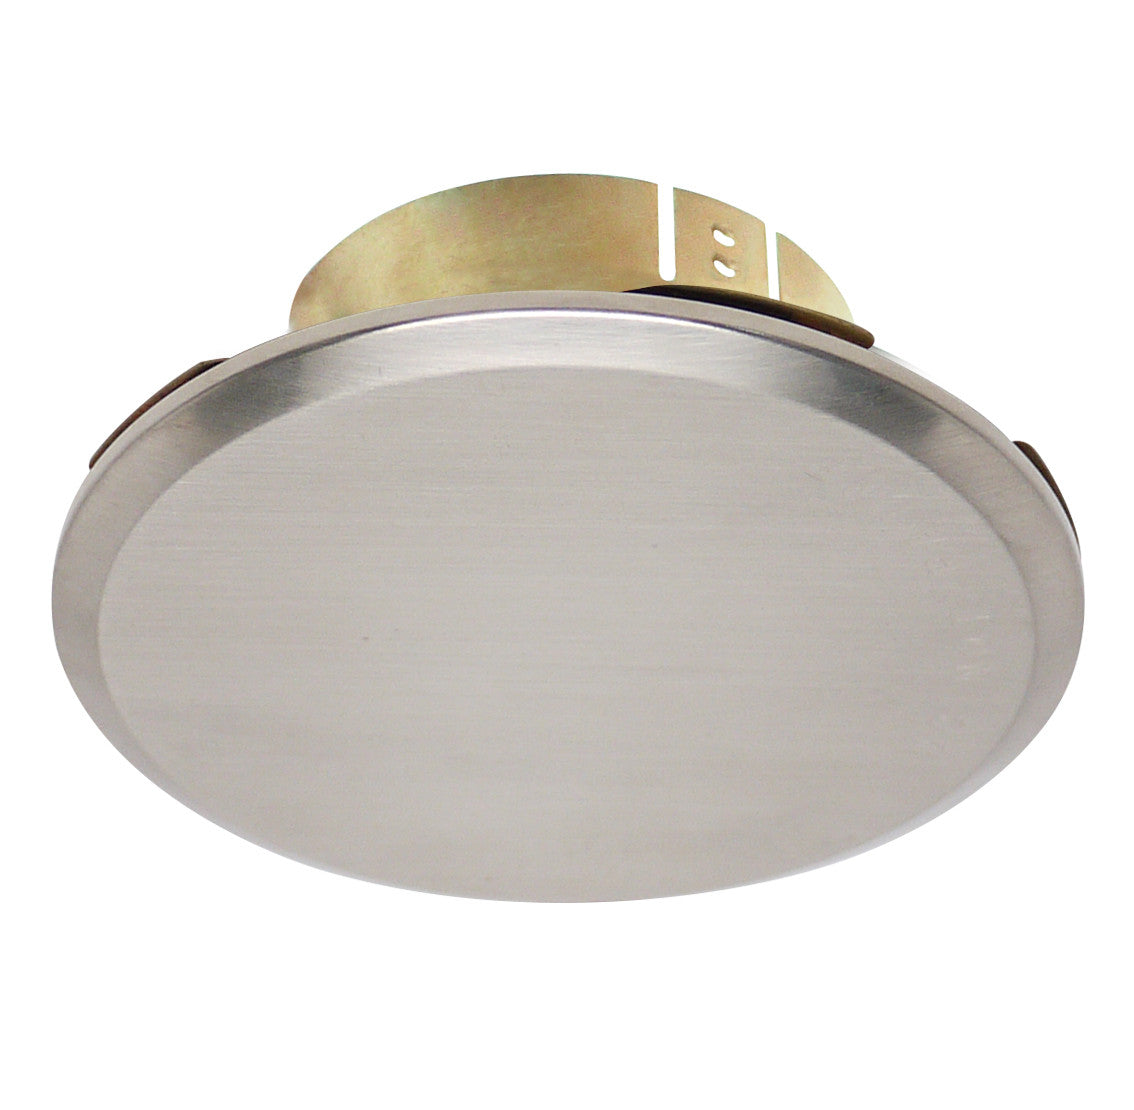 Cover Plate for RC Sprinklers, Residential/Commercial, 3-1/4" Round, Nickel (Brushed Finish)